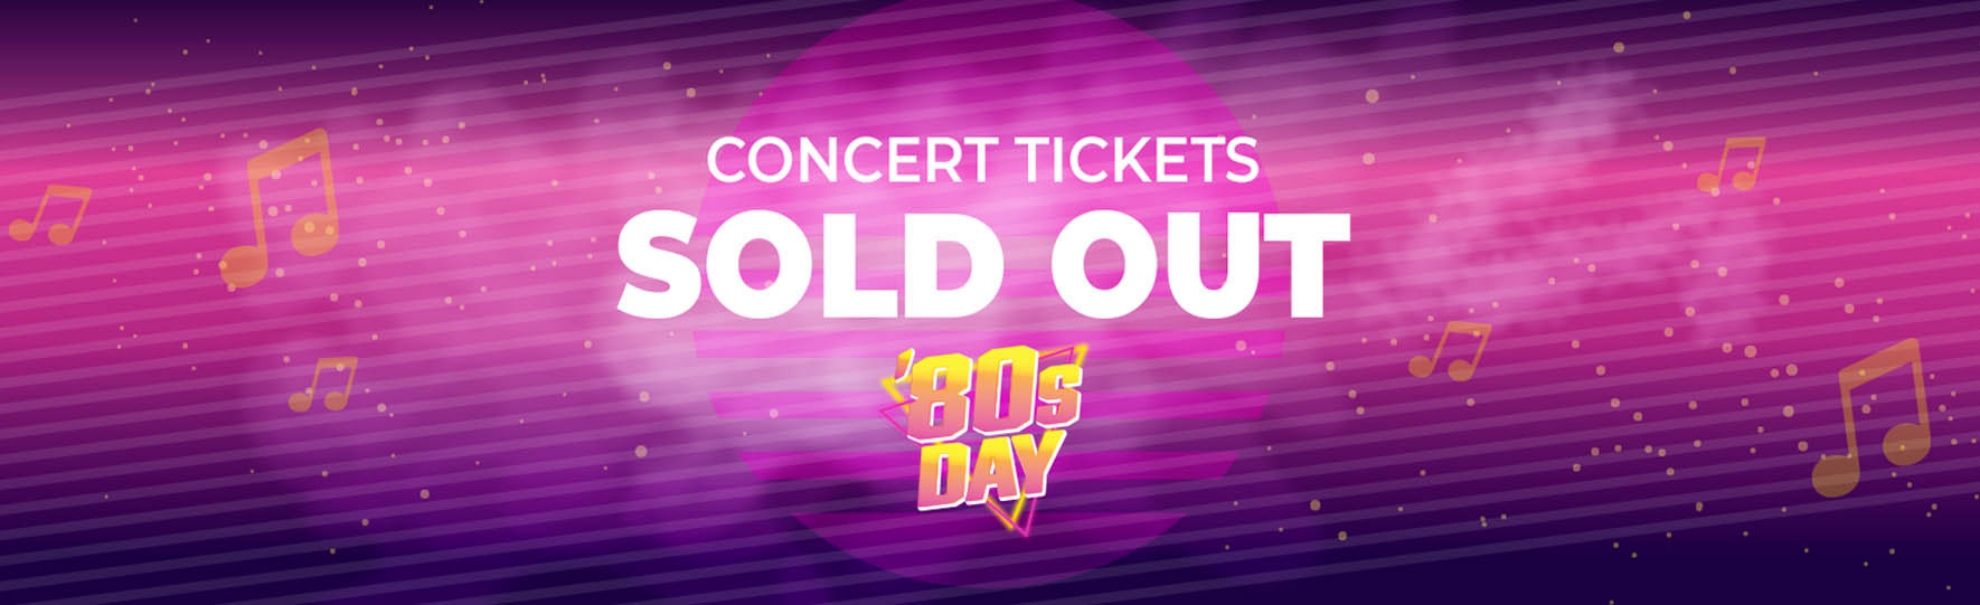 80sDay Concert Ticket Sold Out